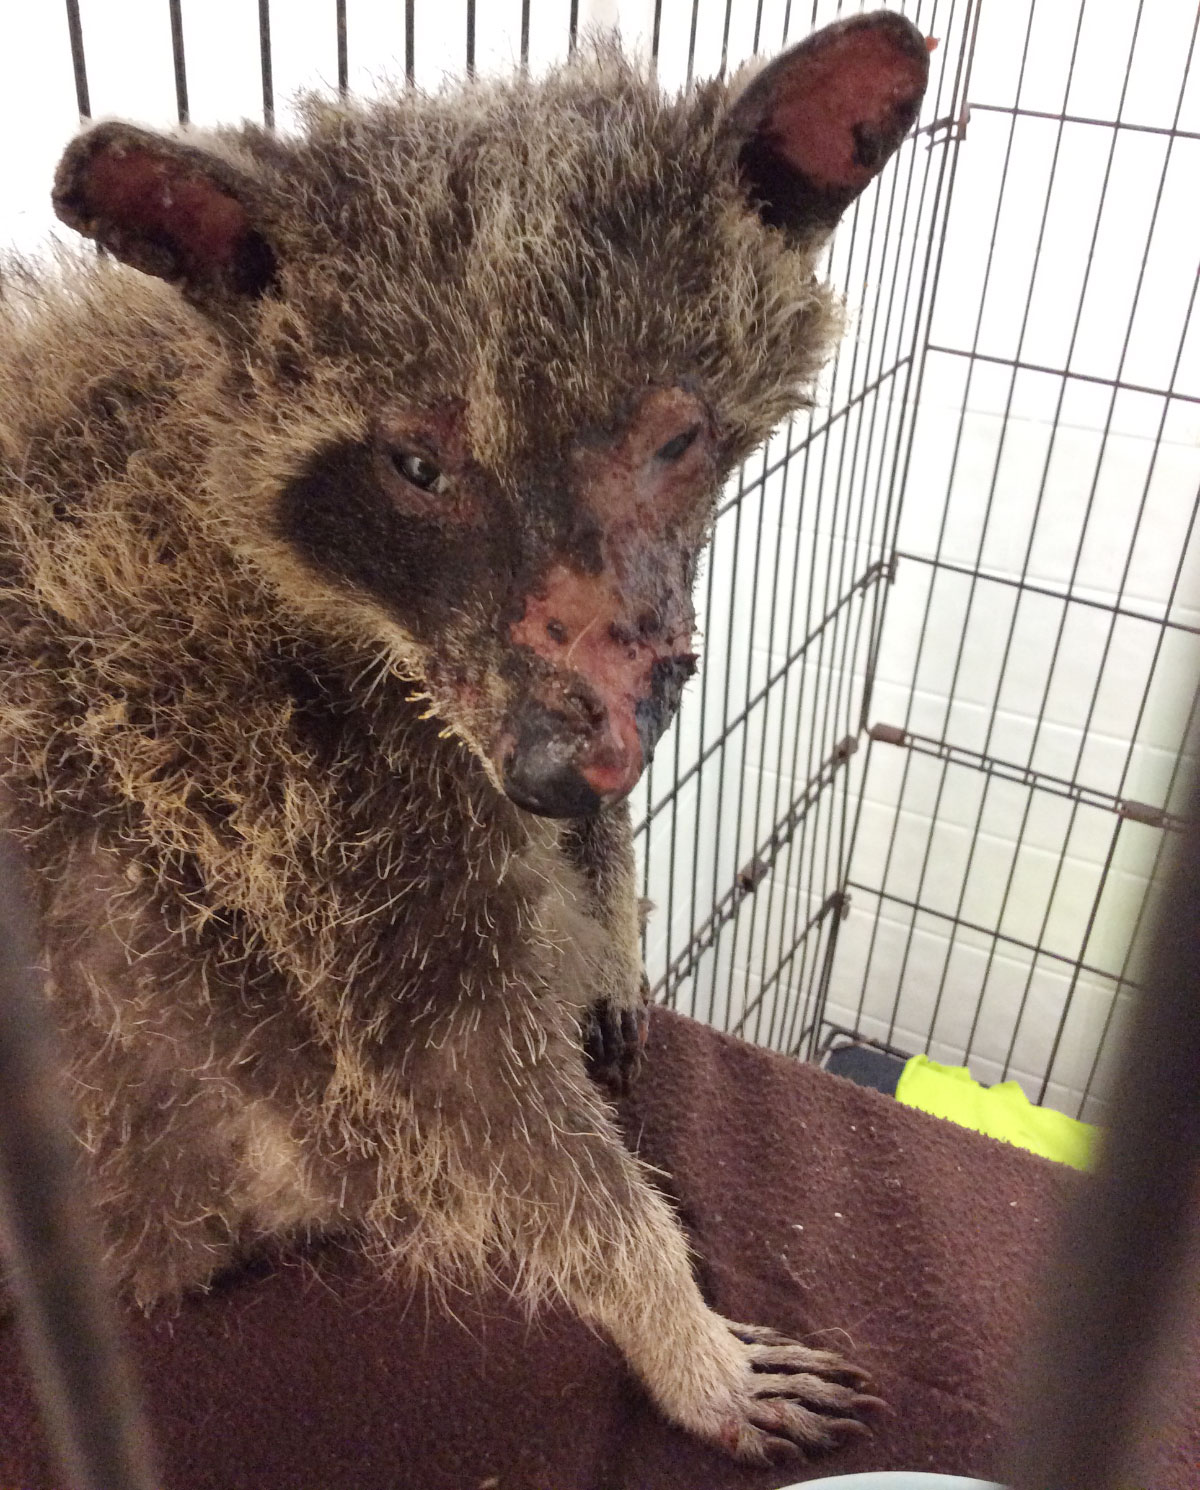 GRAPHIC IMAGES: ,000 reward in case of severely burned raccoon in Barrie